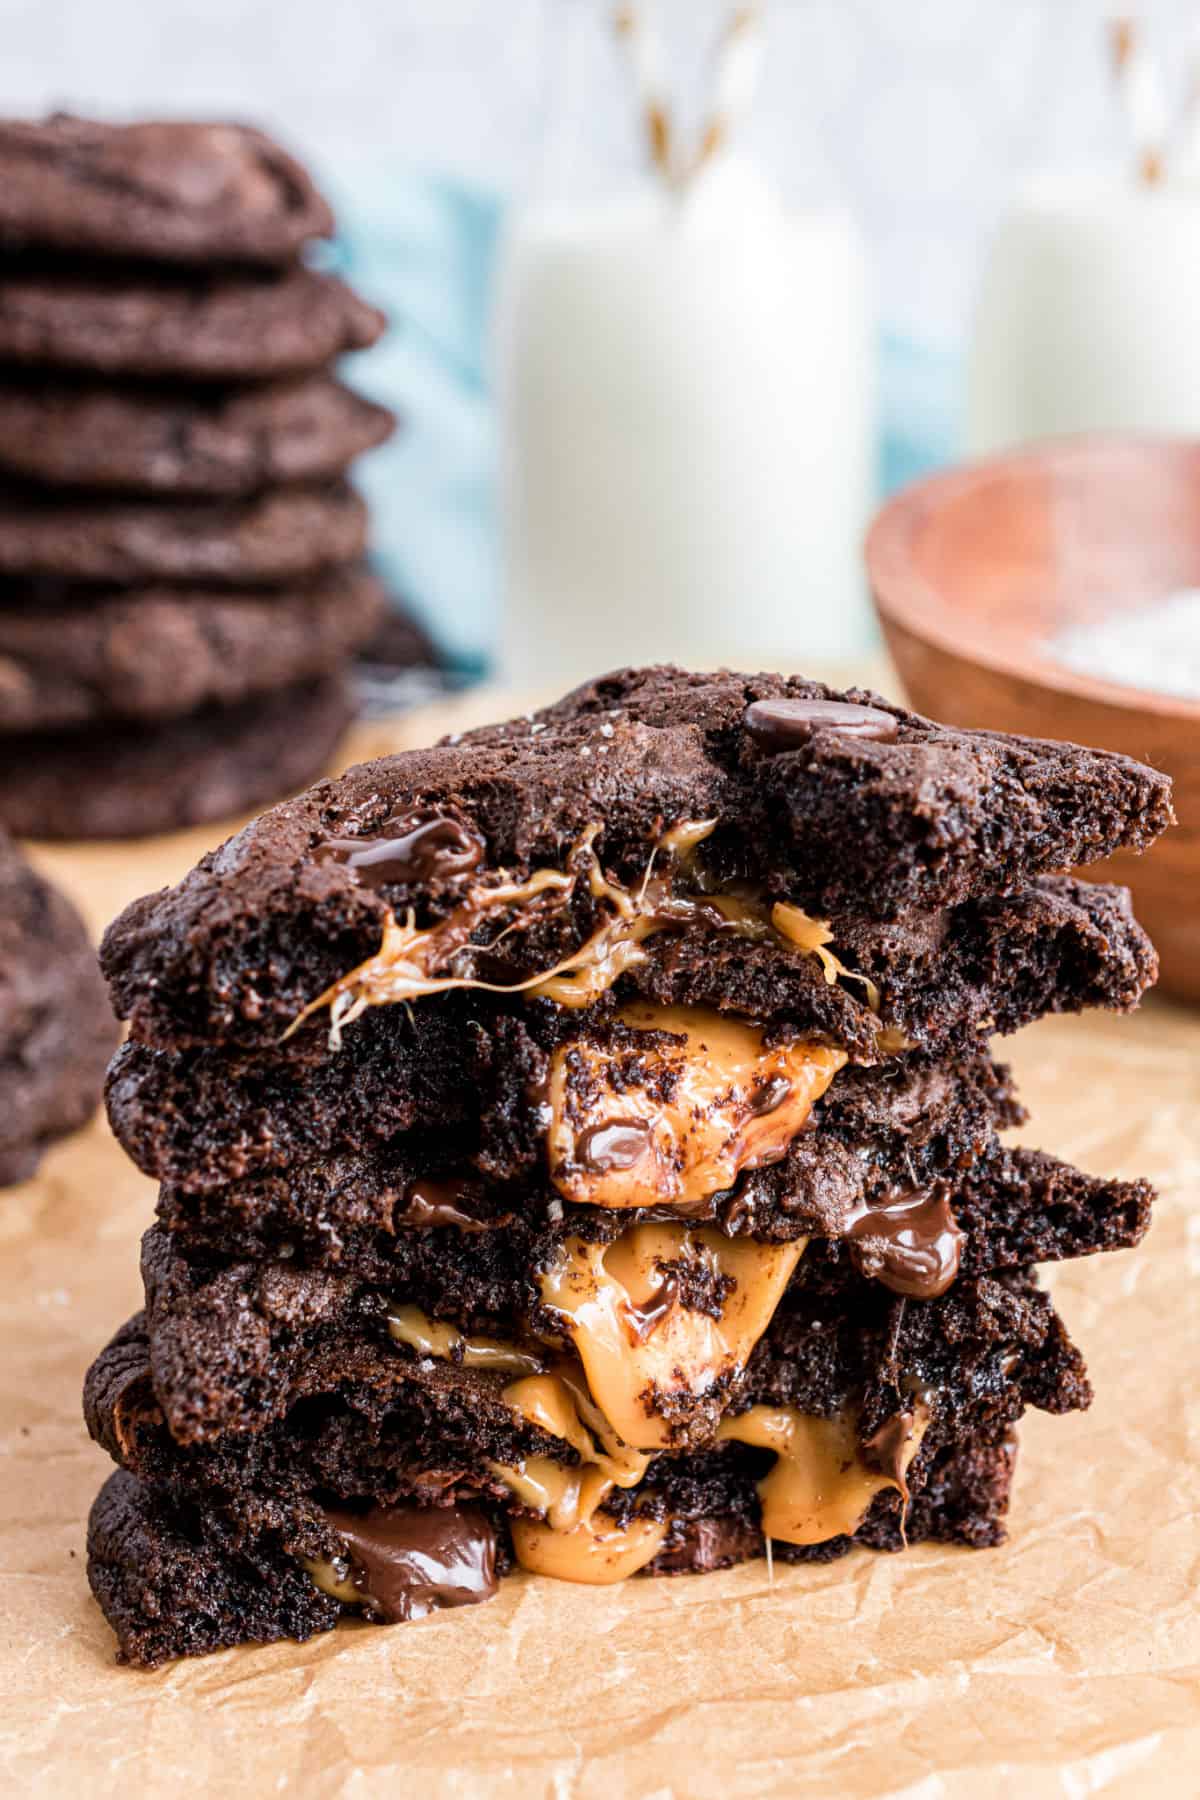 Stack of chocolate cookies cut in half and caramel running down the middle.